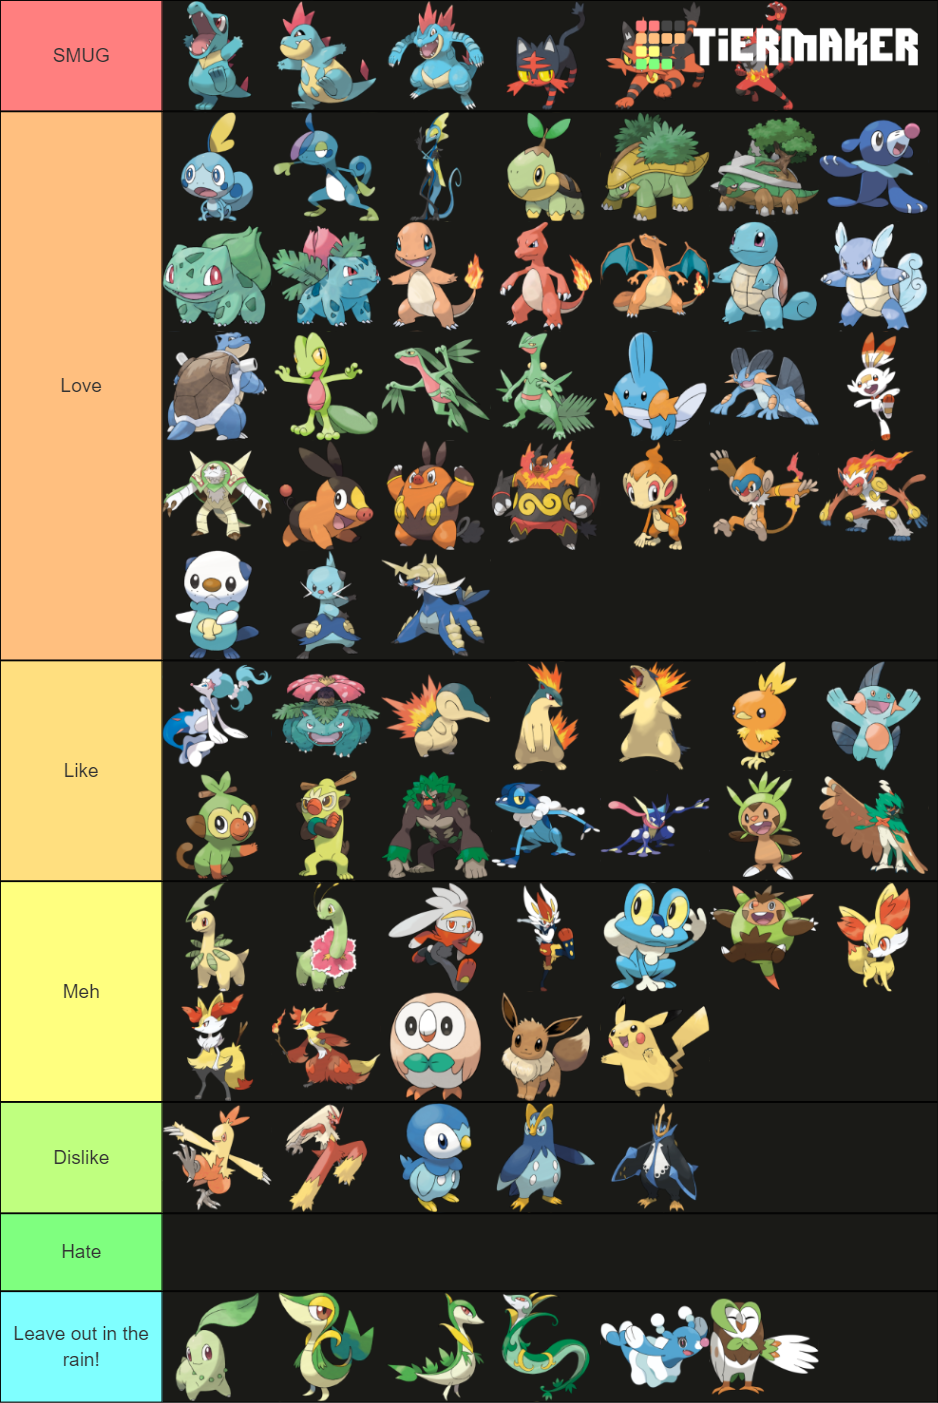 Every Single Starter Pokémon Ranked: What's your tier list like